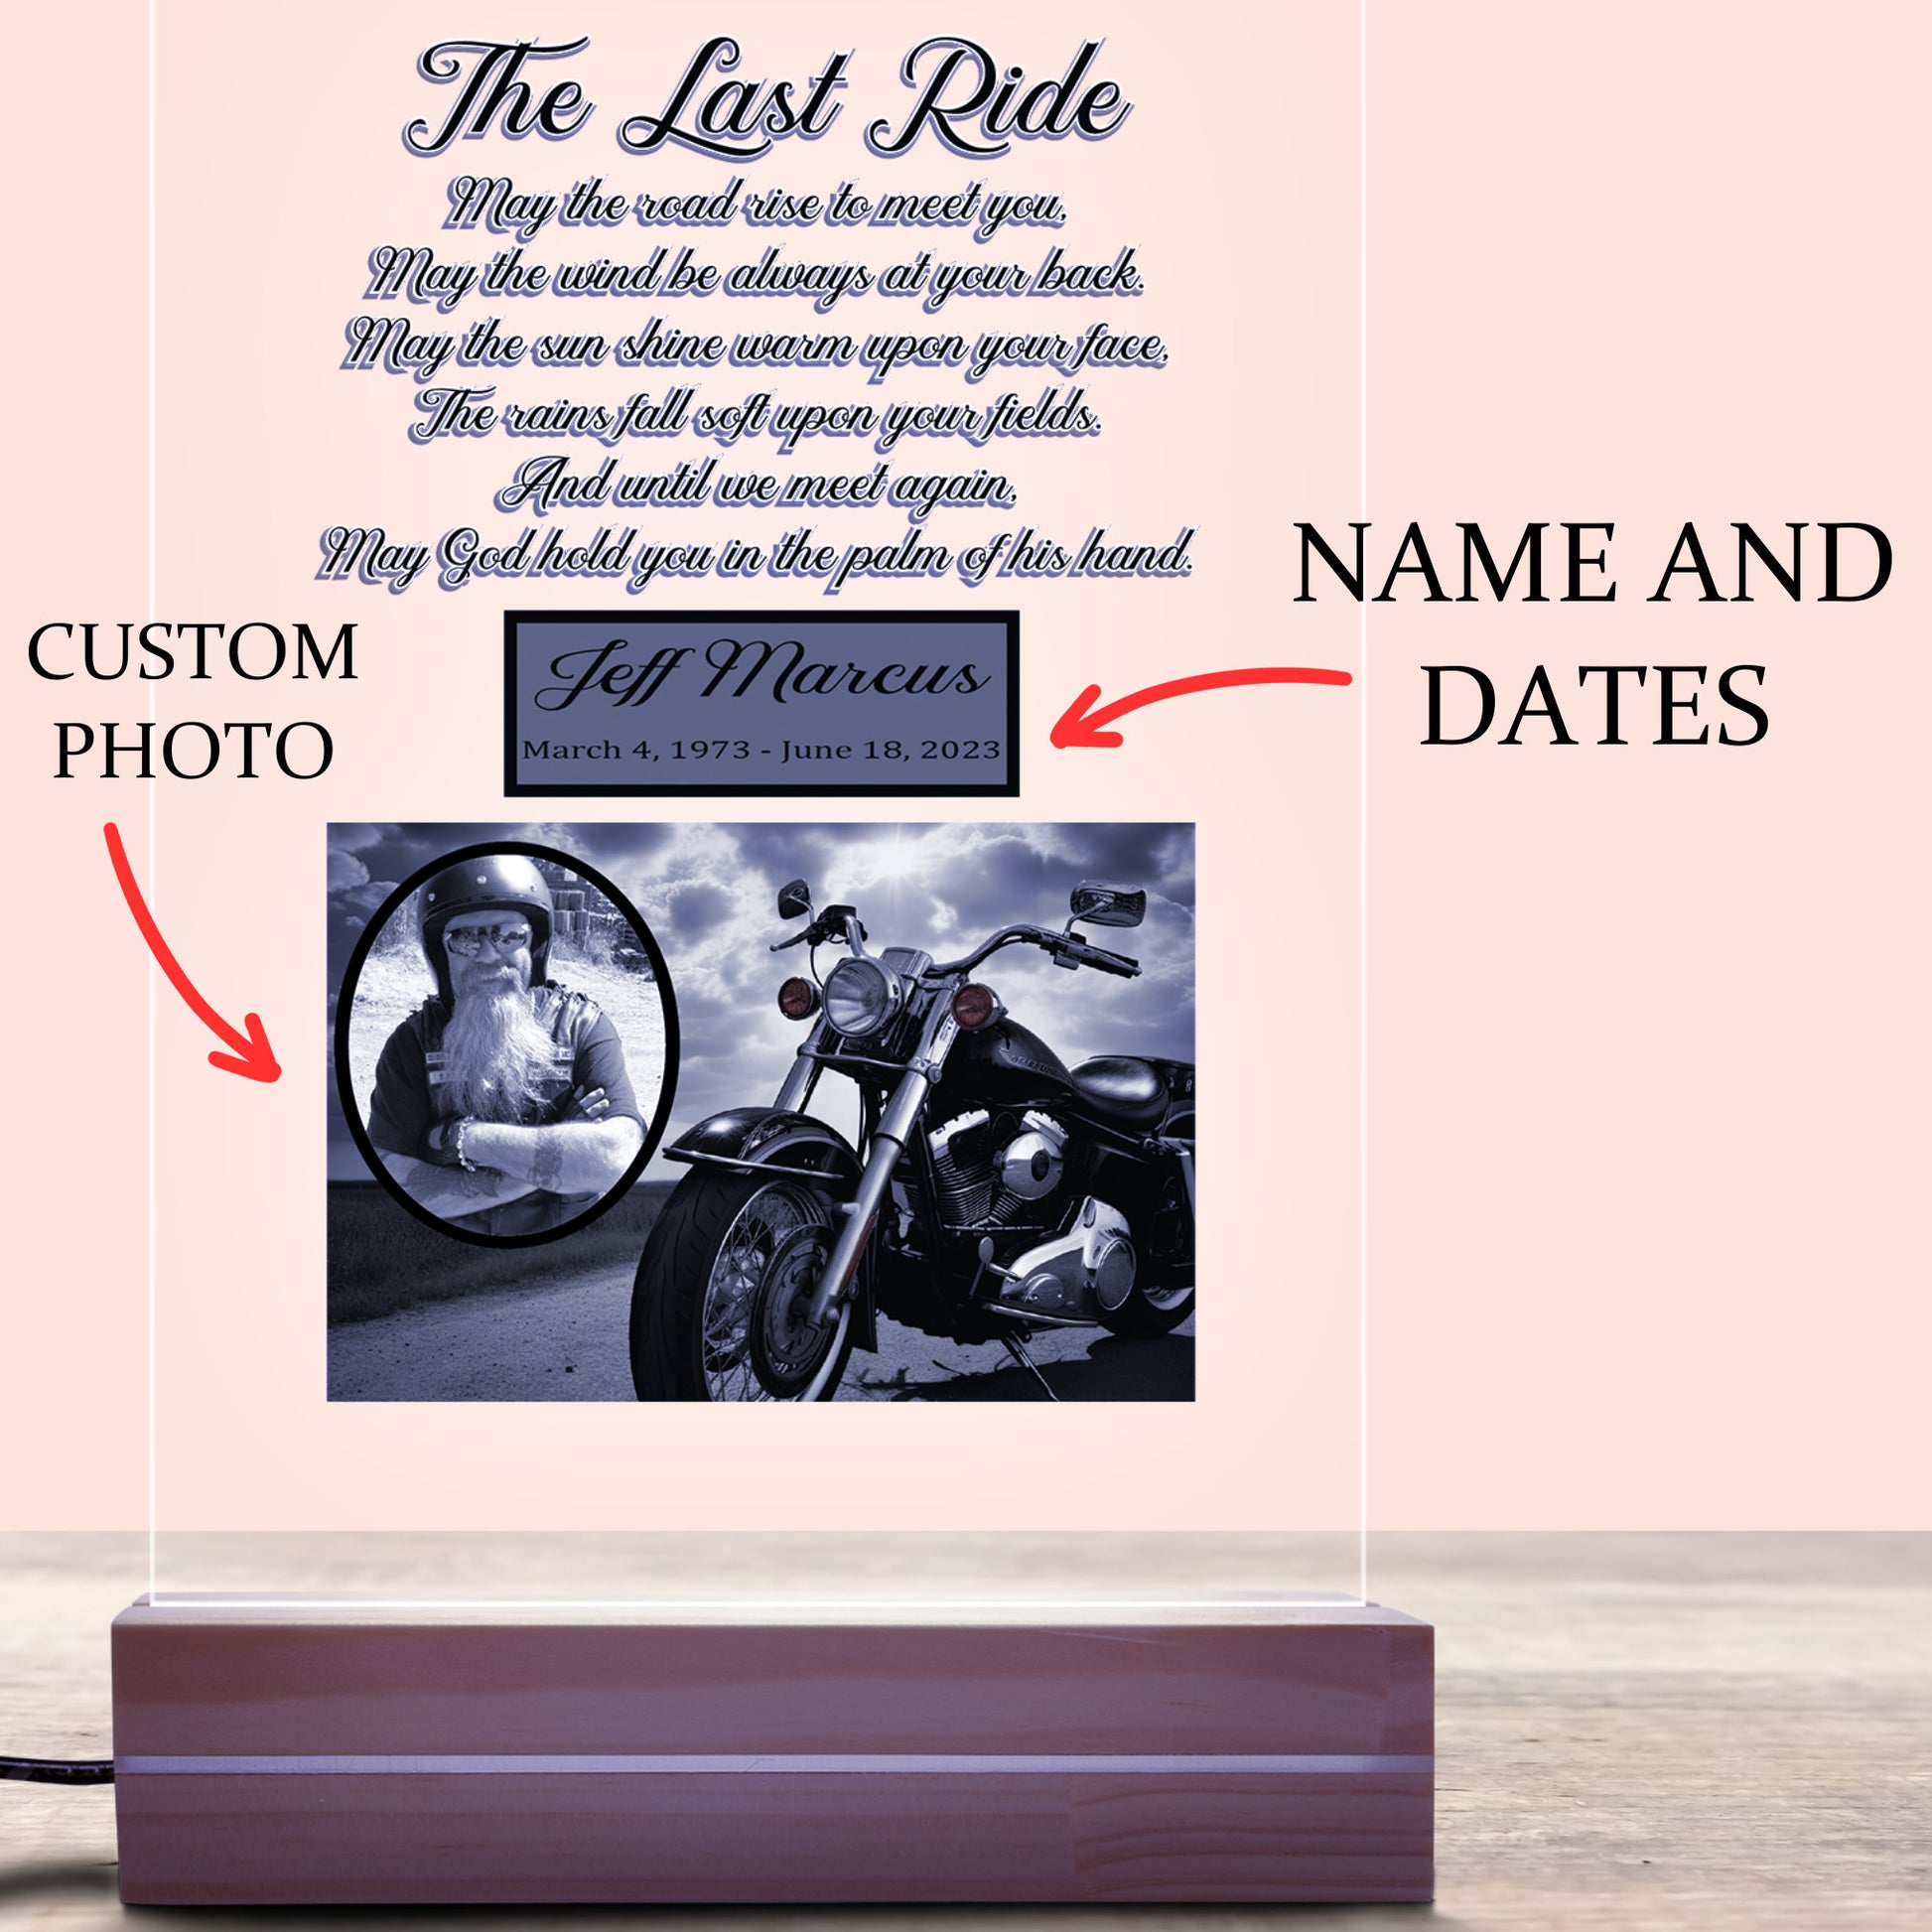 Motorcycle Custom Personalized Photo LED Wood Stand, Biker Room Night Light Up Table Lamp Remembrance Loss Sympathy Memorial Gift